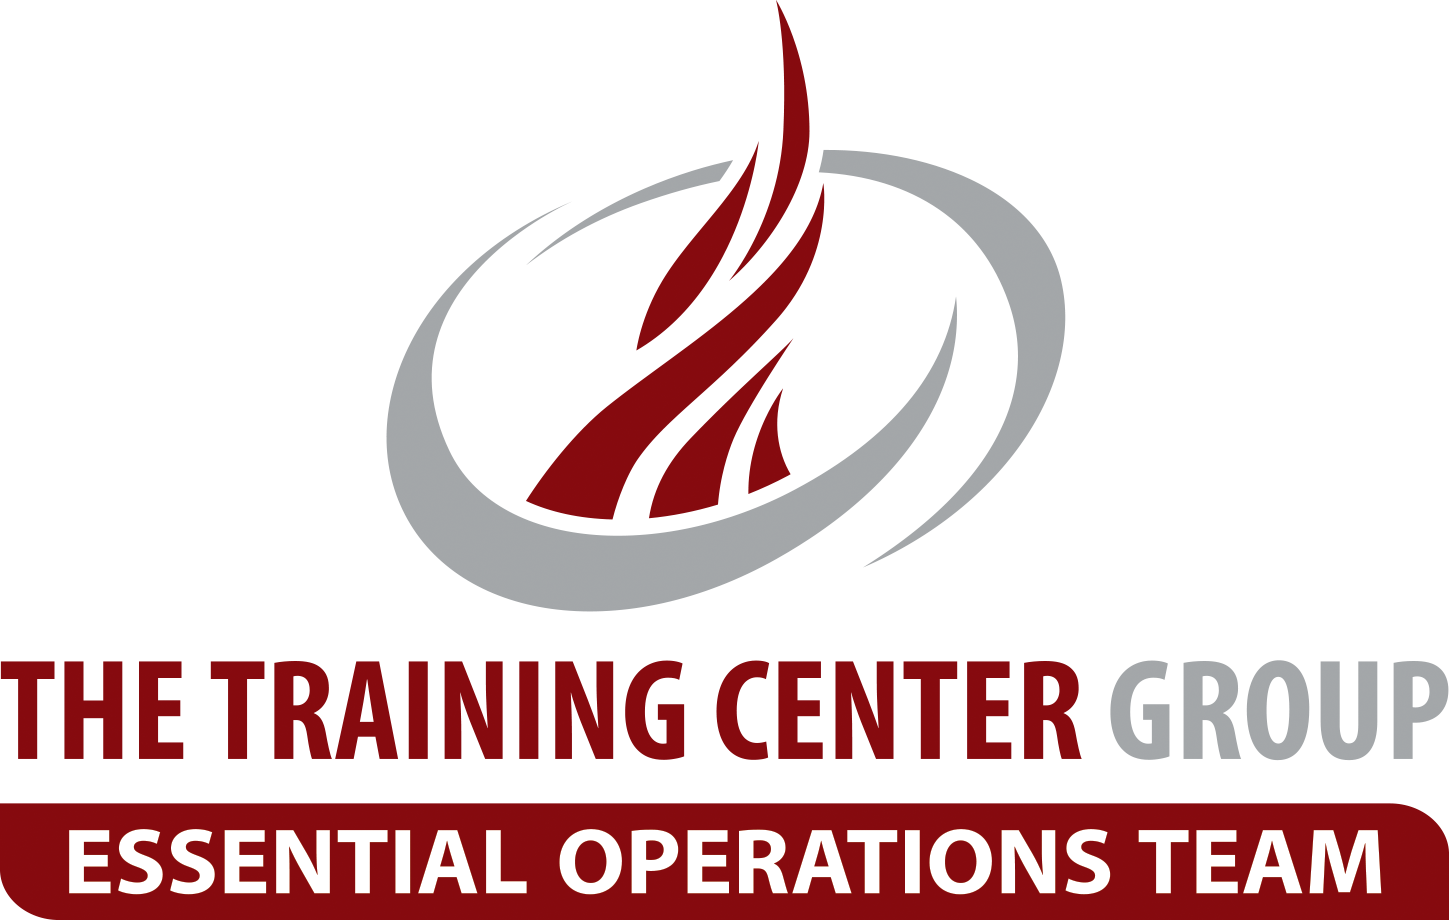 The Training Center Group